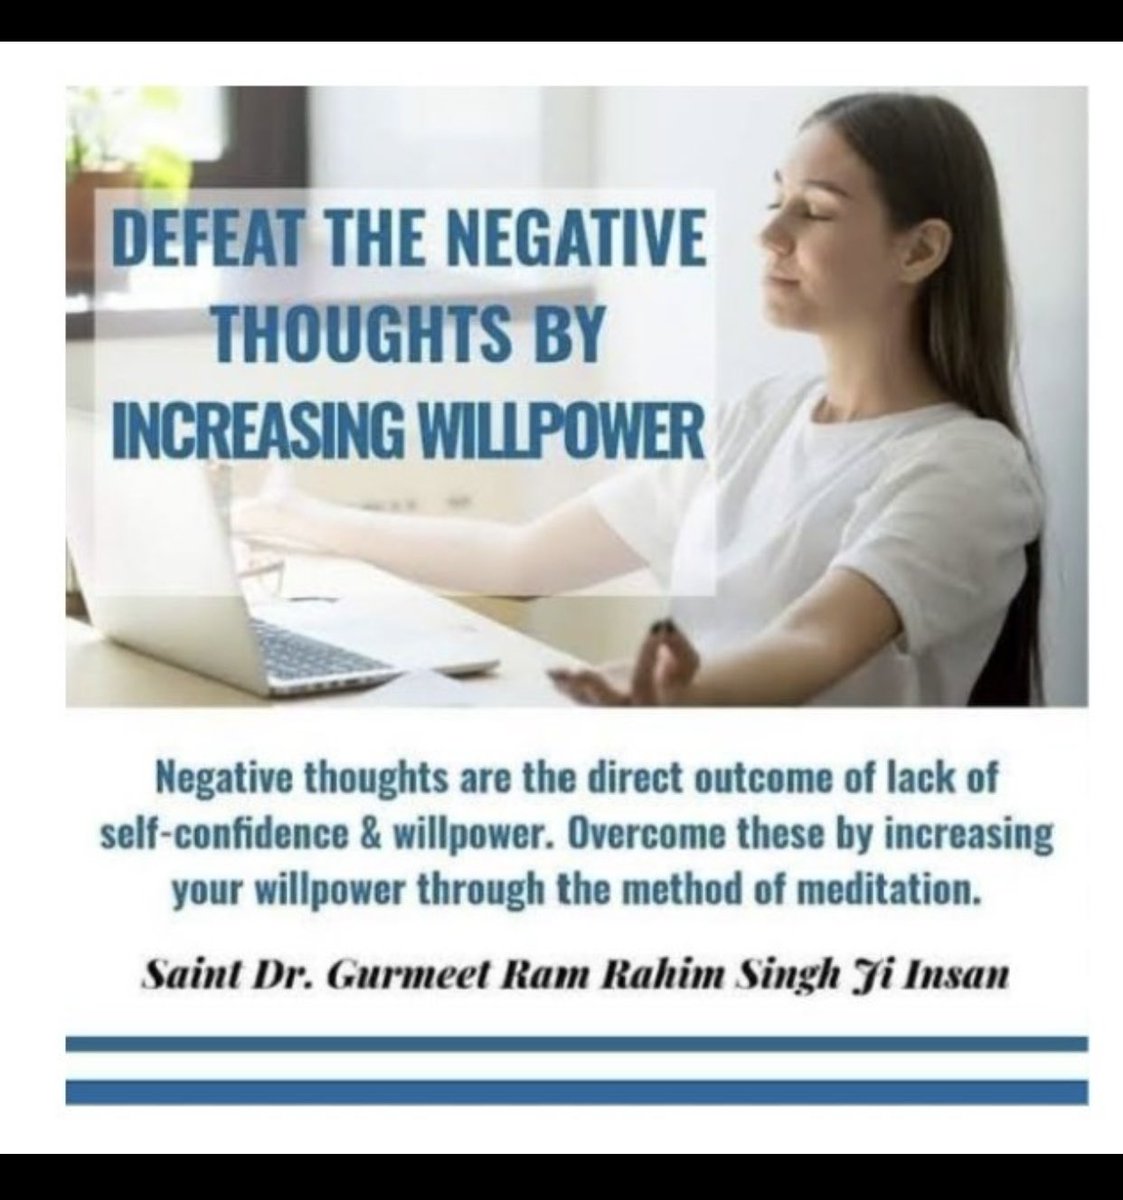 With the will power man becomes physically strong. Moreover, he does not feel any kind of weakness in any field. And will power can be attained by meditation. It has uncountable benefits. #DefeatNegativity

Saint MSG 
Meditation